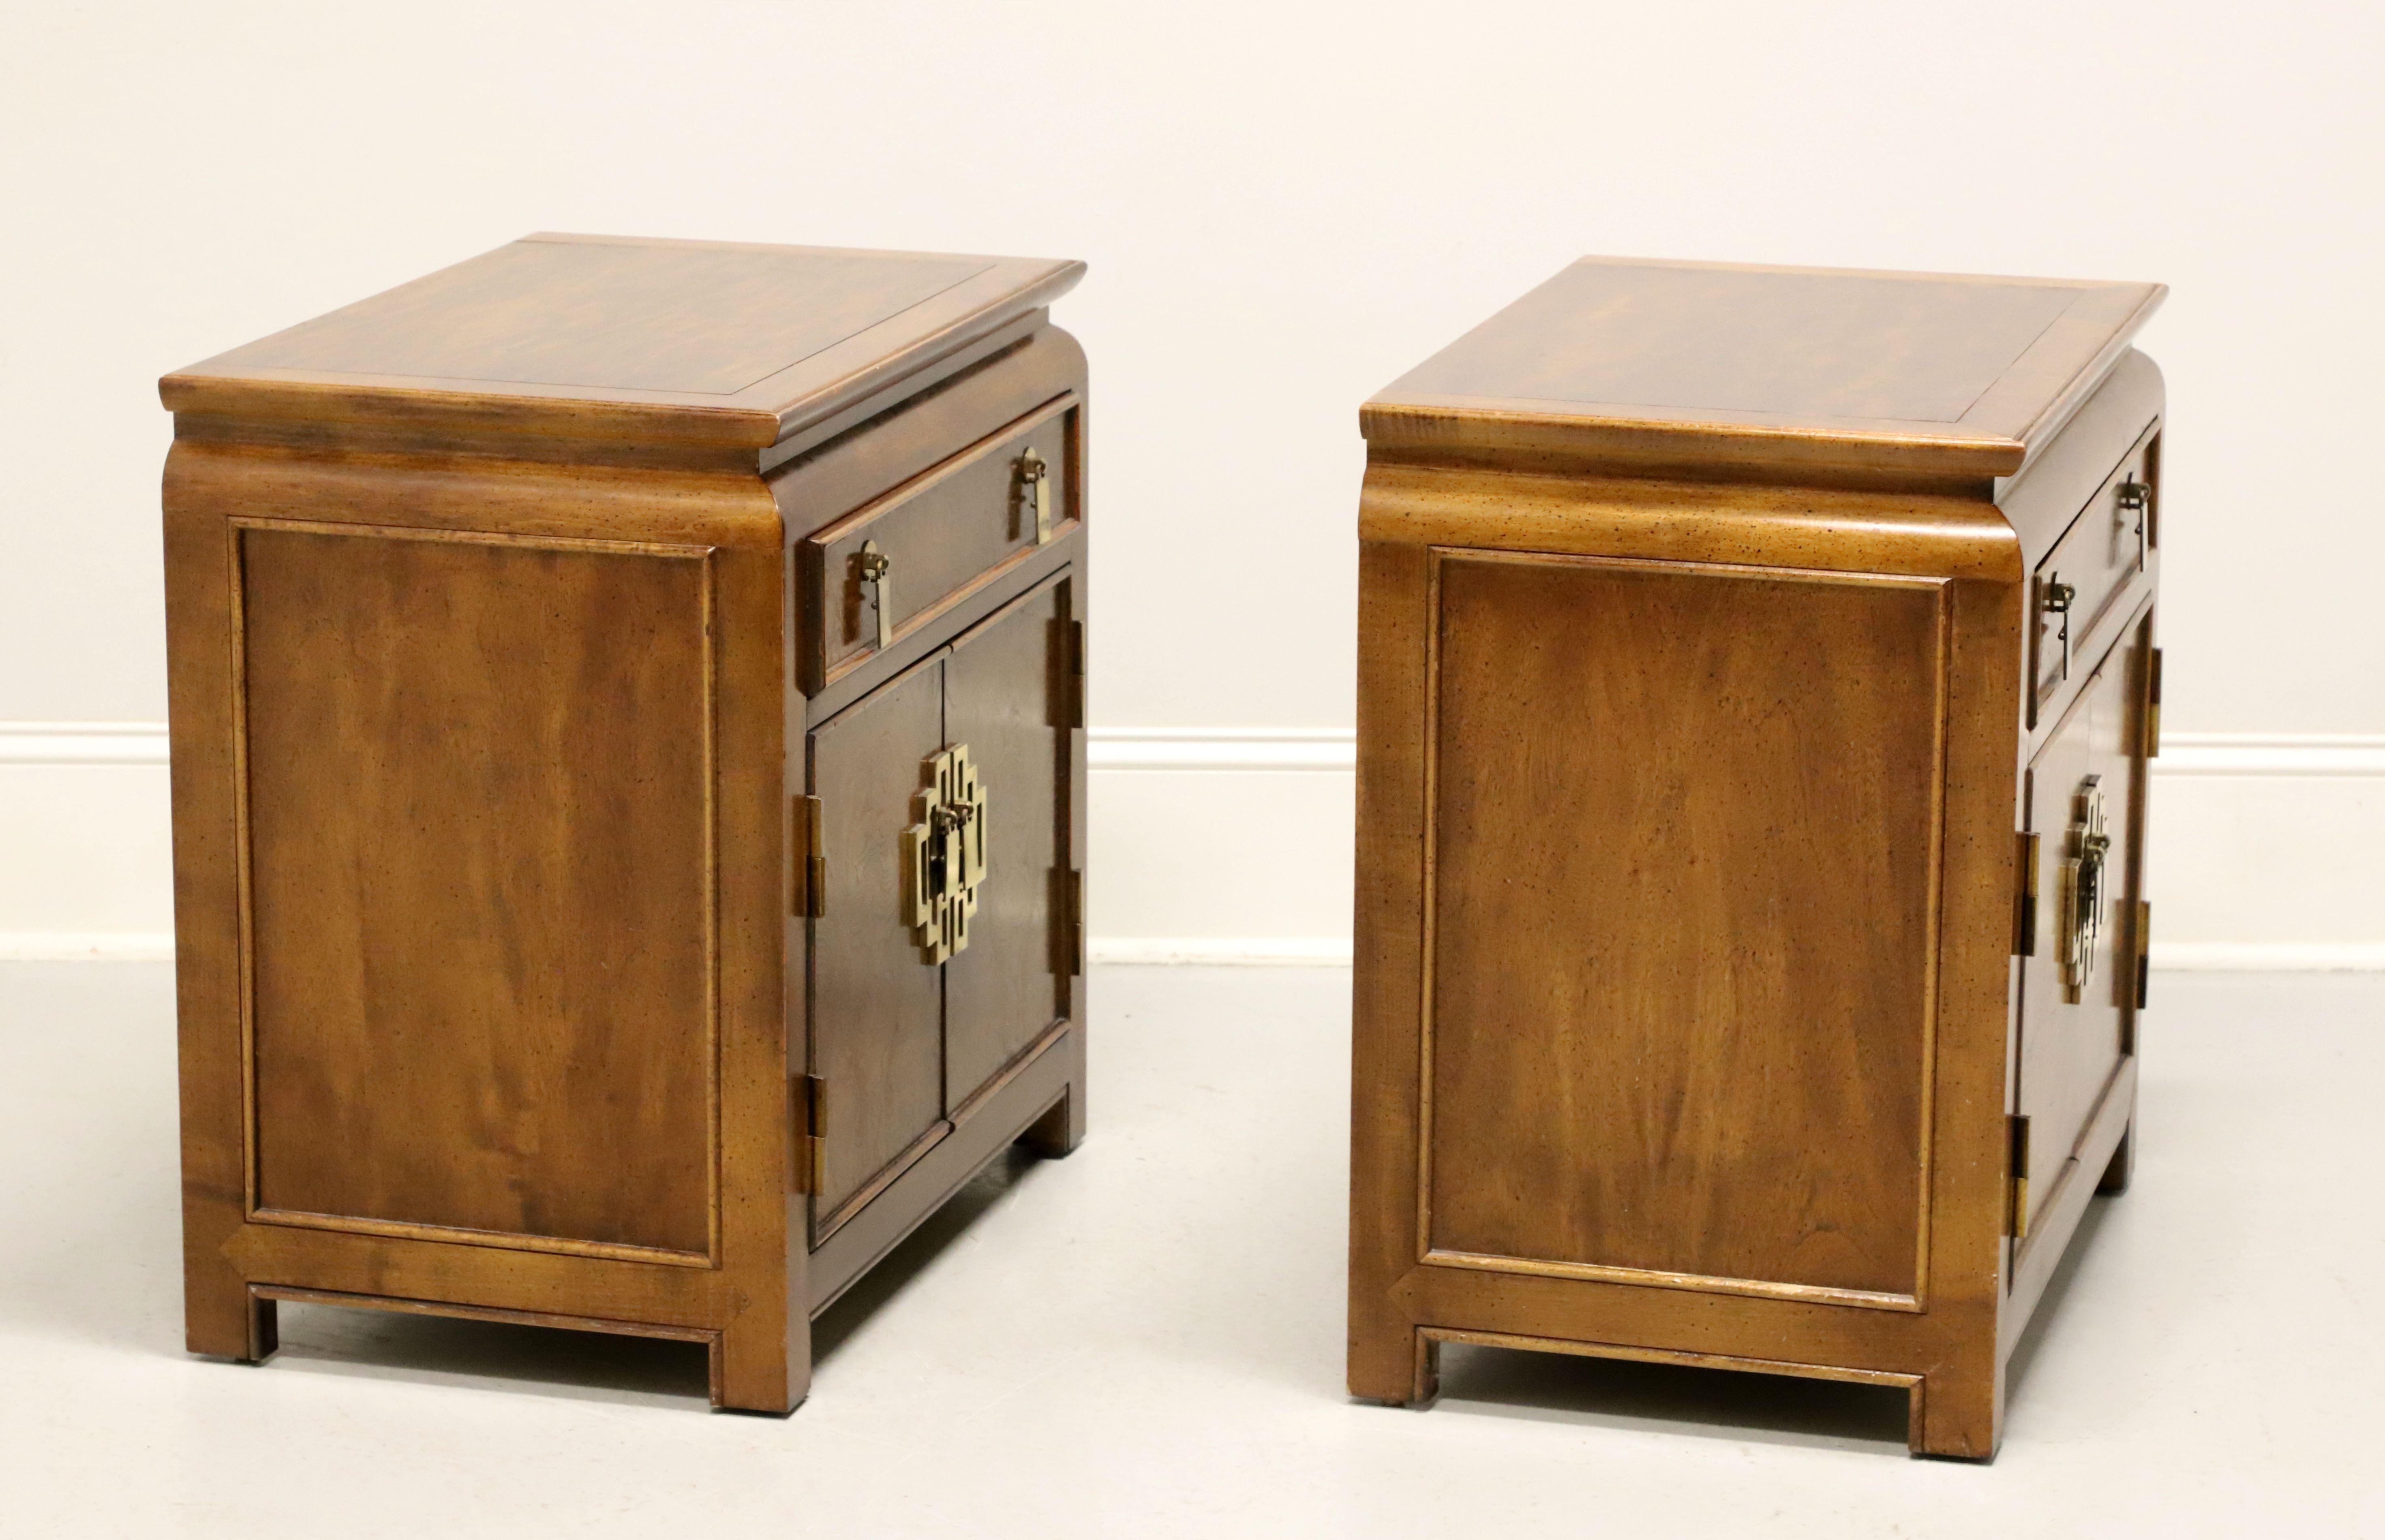 A pair of Asian style nightstands by high-quality furniture maker Century Furniture, from their 